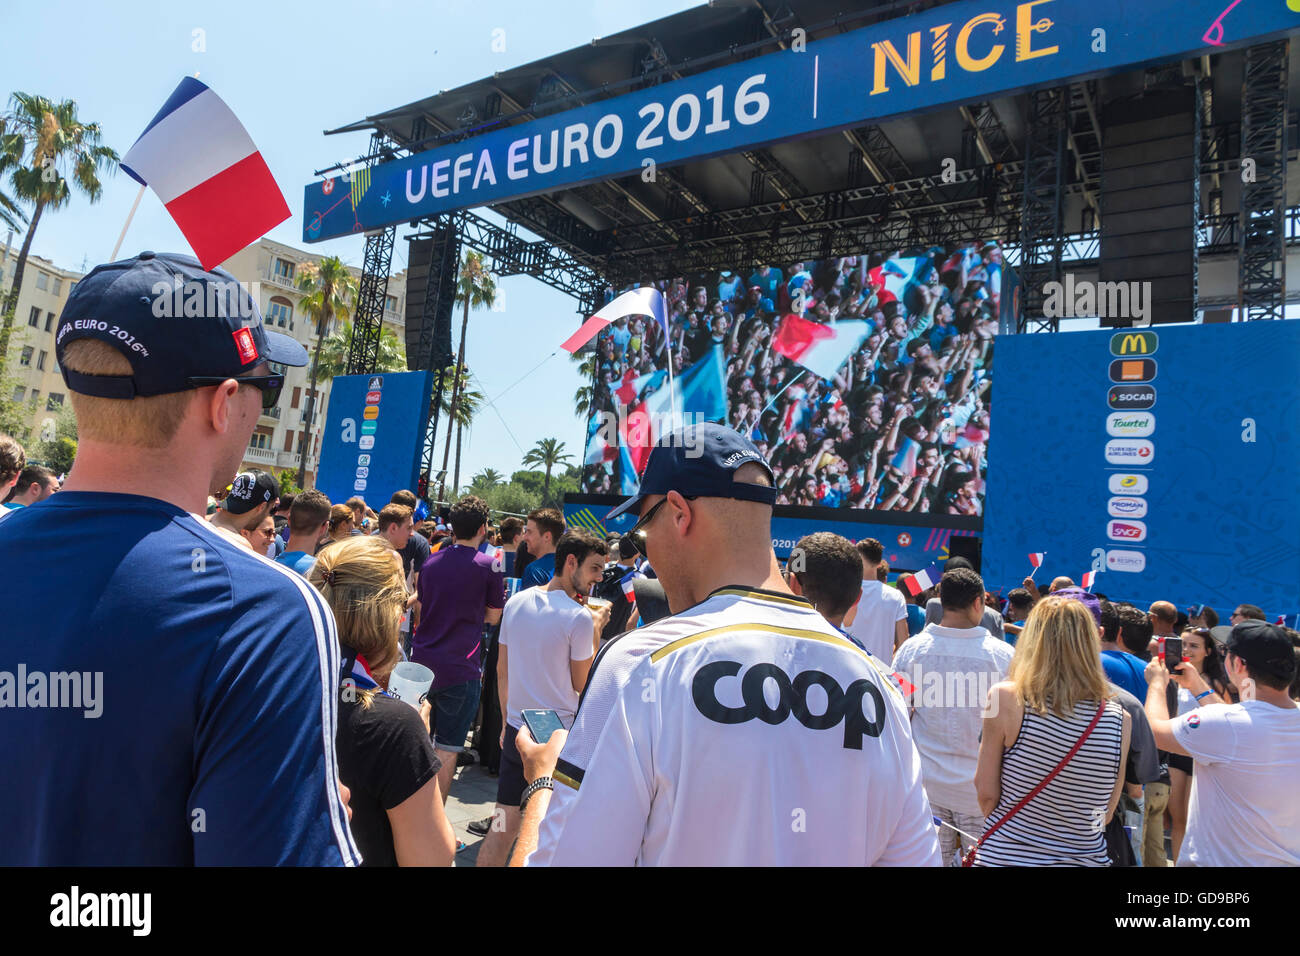 NICE, FRANCE - JUNE 26, 2016: People have fun at official fanzone of UEFA EURO 2016 at Albert I Garden in City of Nice, France Stock Photo